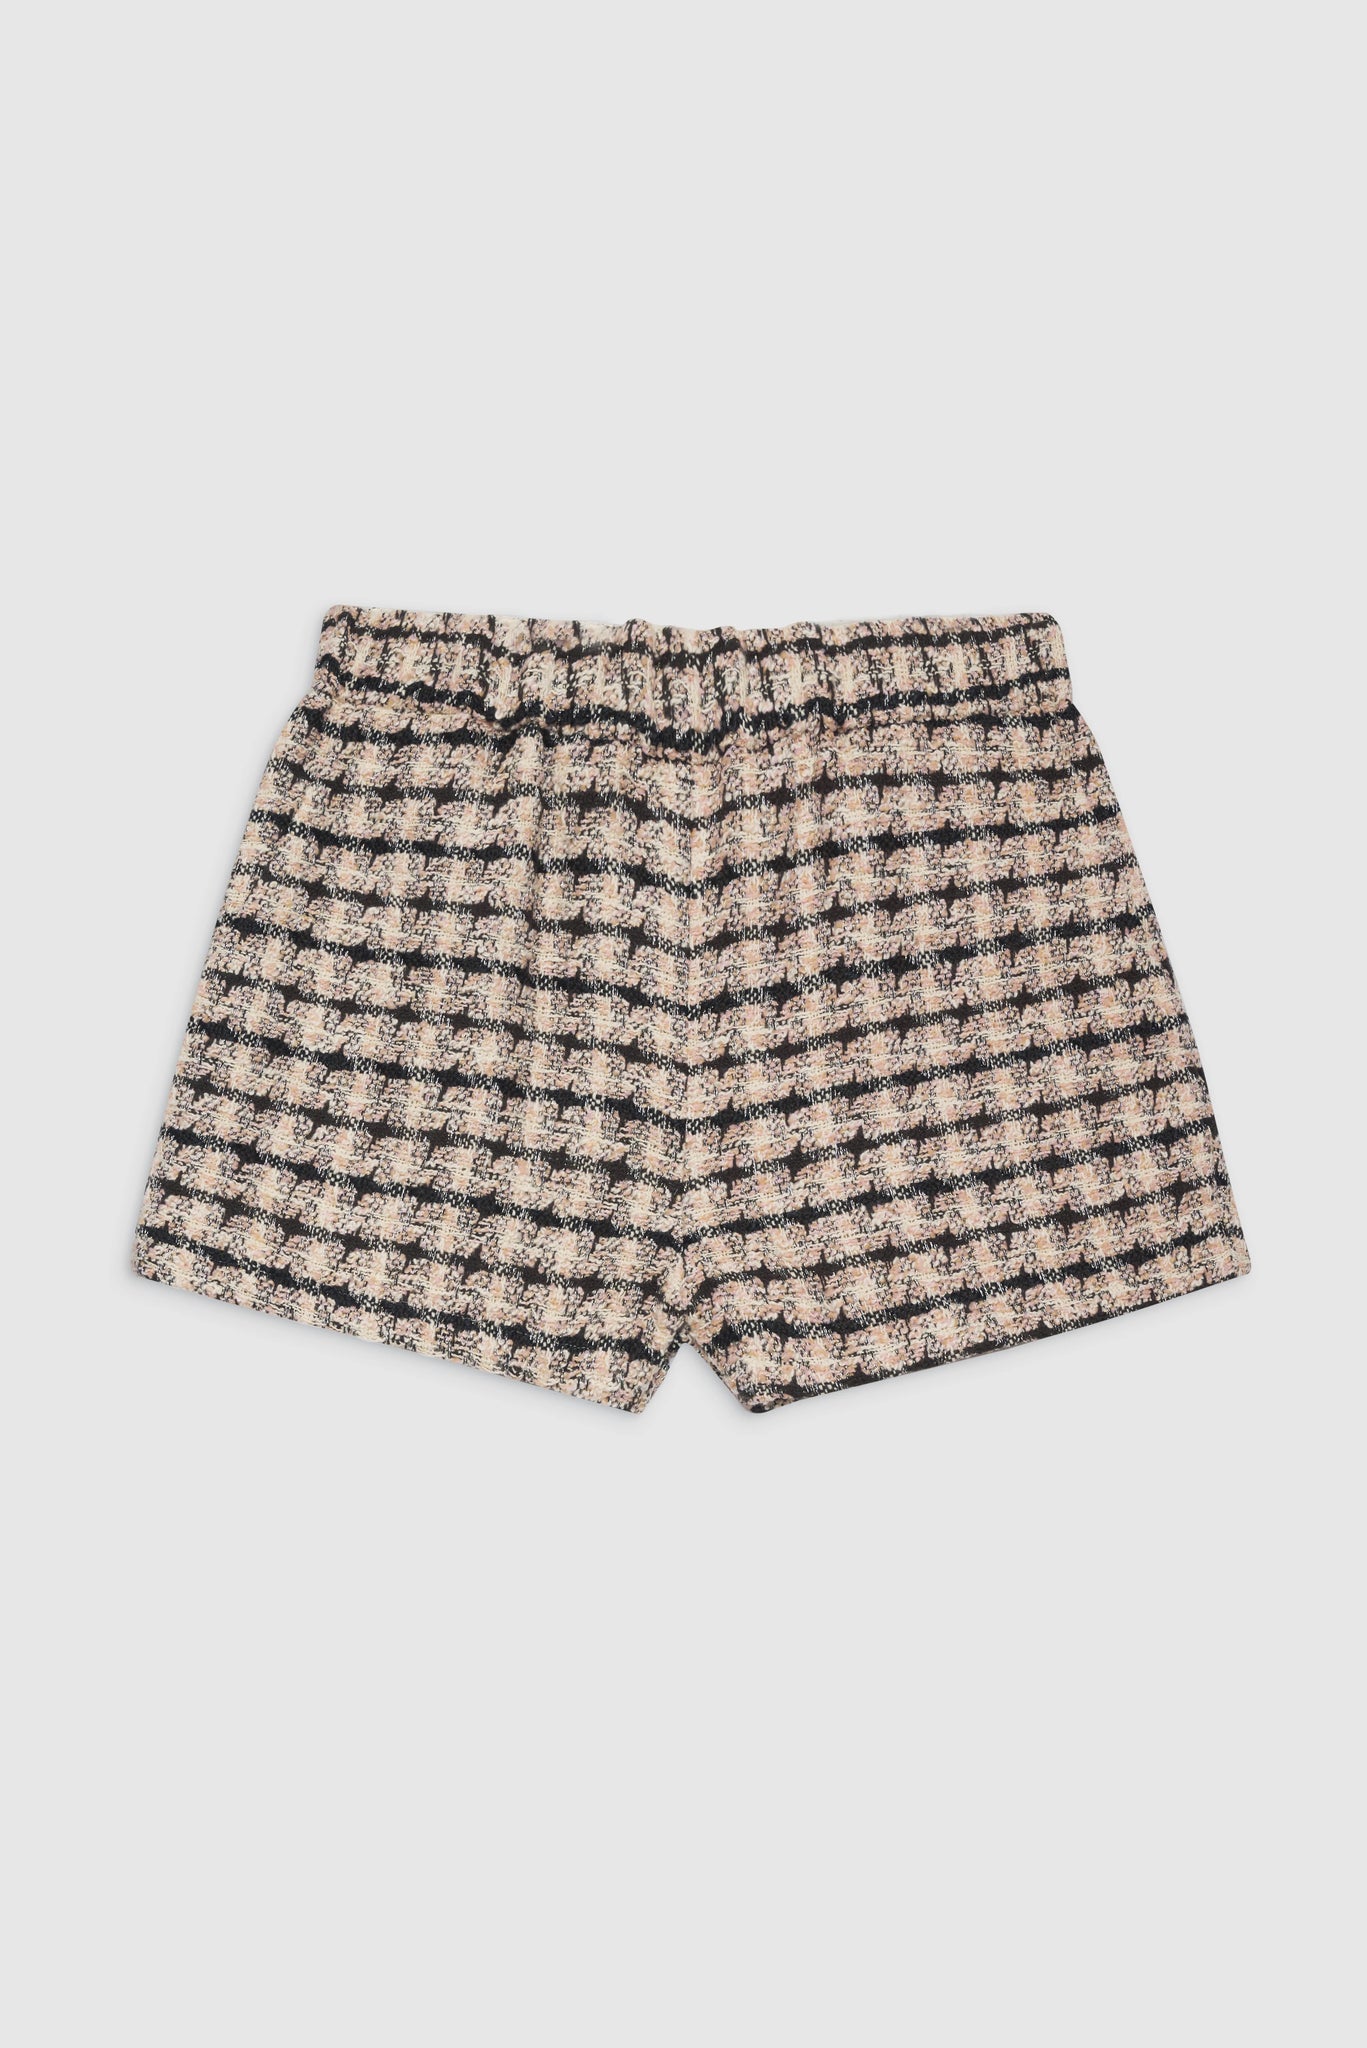 Lyle Short in Apricot Tweed